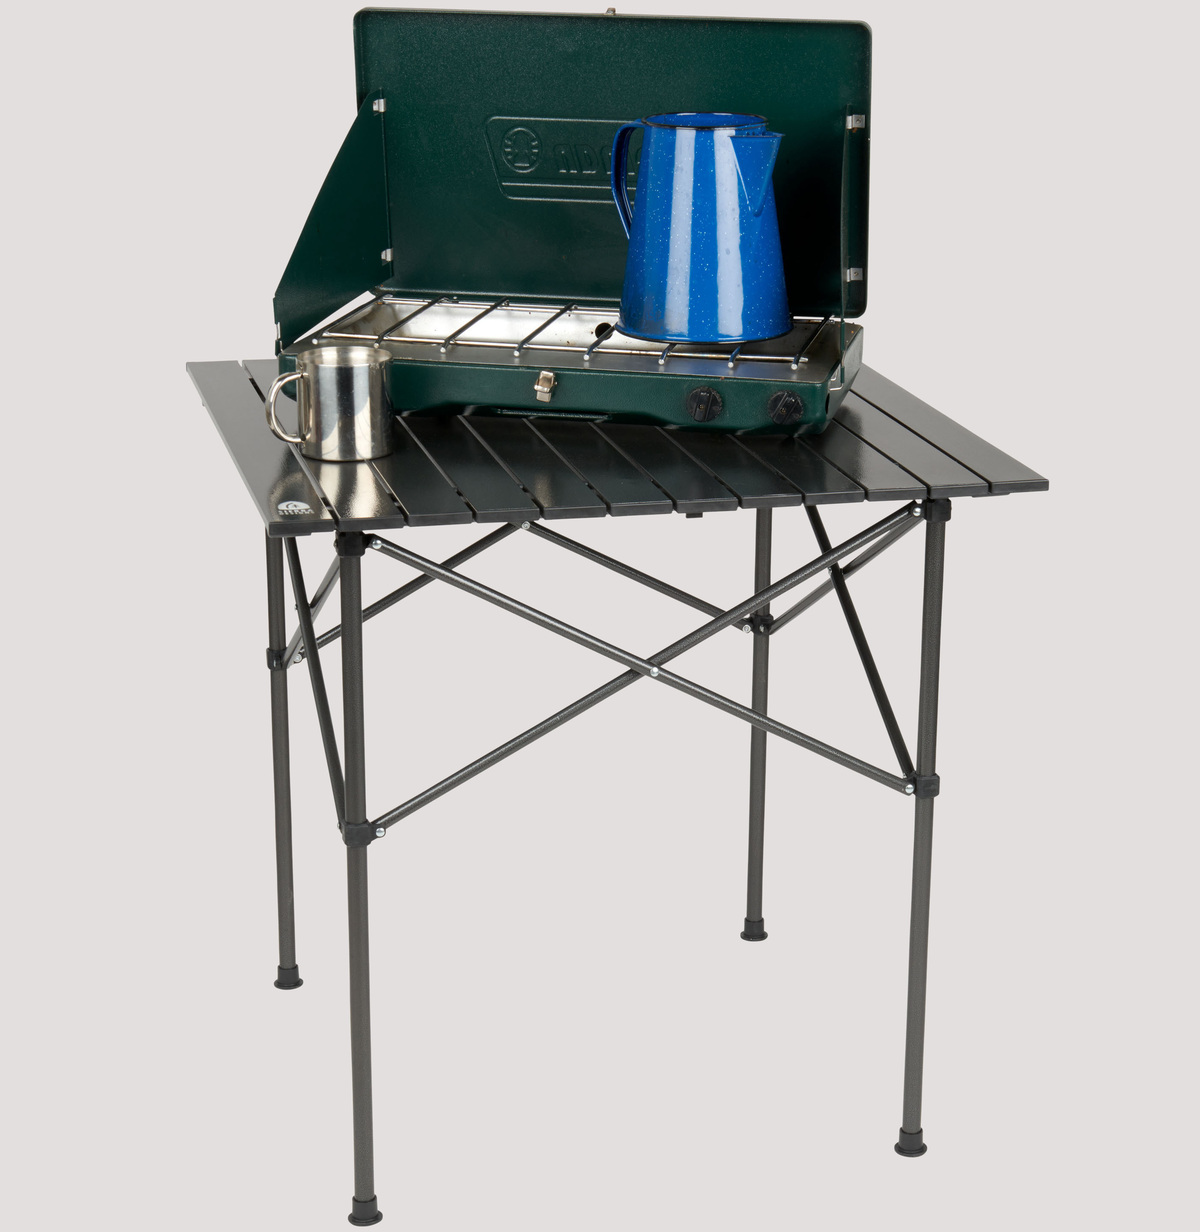 EASY ROLL UP ALUMINUM TABLE camping enough easy-rollcar camping roll-top design set breeze